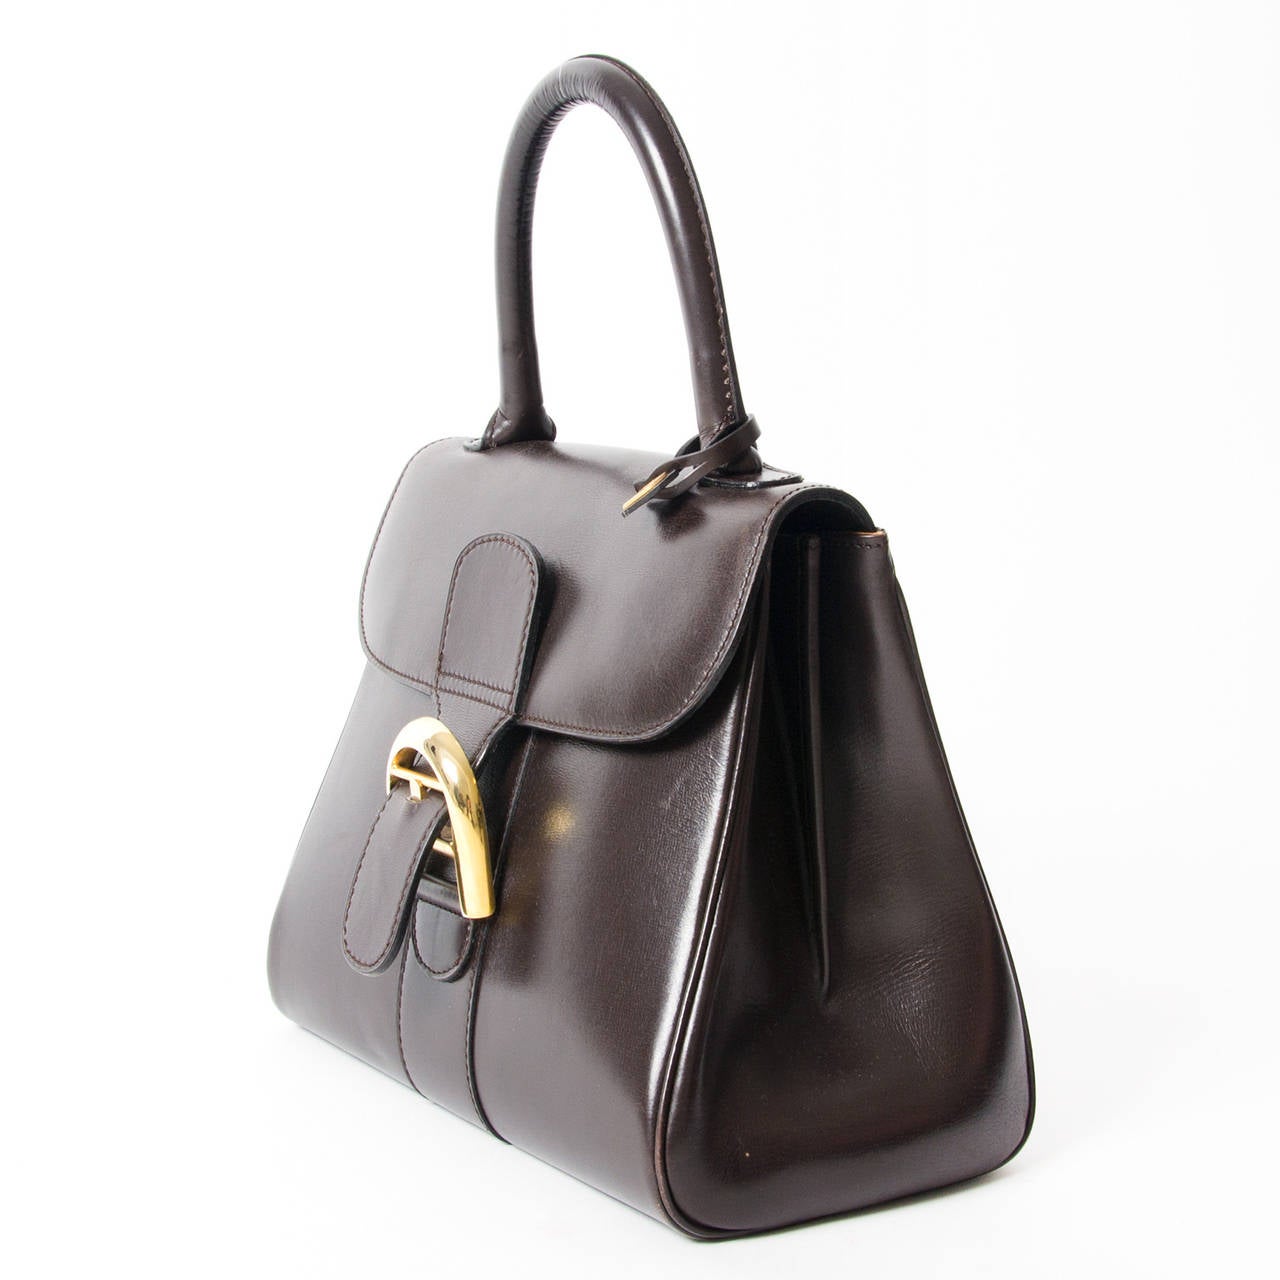 Delvaux Brillant PM with gold hardware in a gorgeous chocolate brown leather material. This classic satchel from premium Belgium luxury leather goods brand Delvaux excels in both style and quality. Top handle for comfortable and elegant use. Iconic